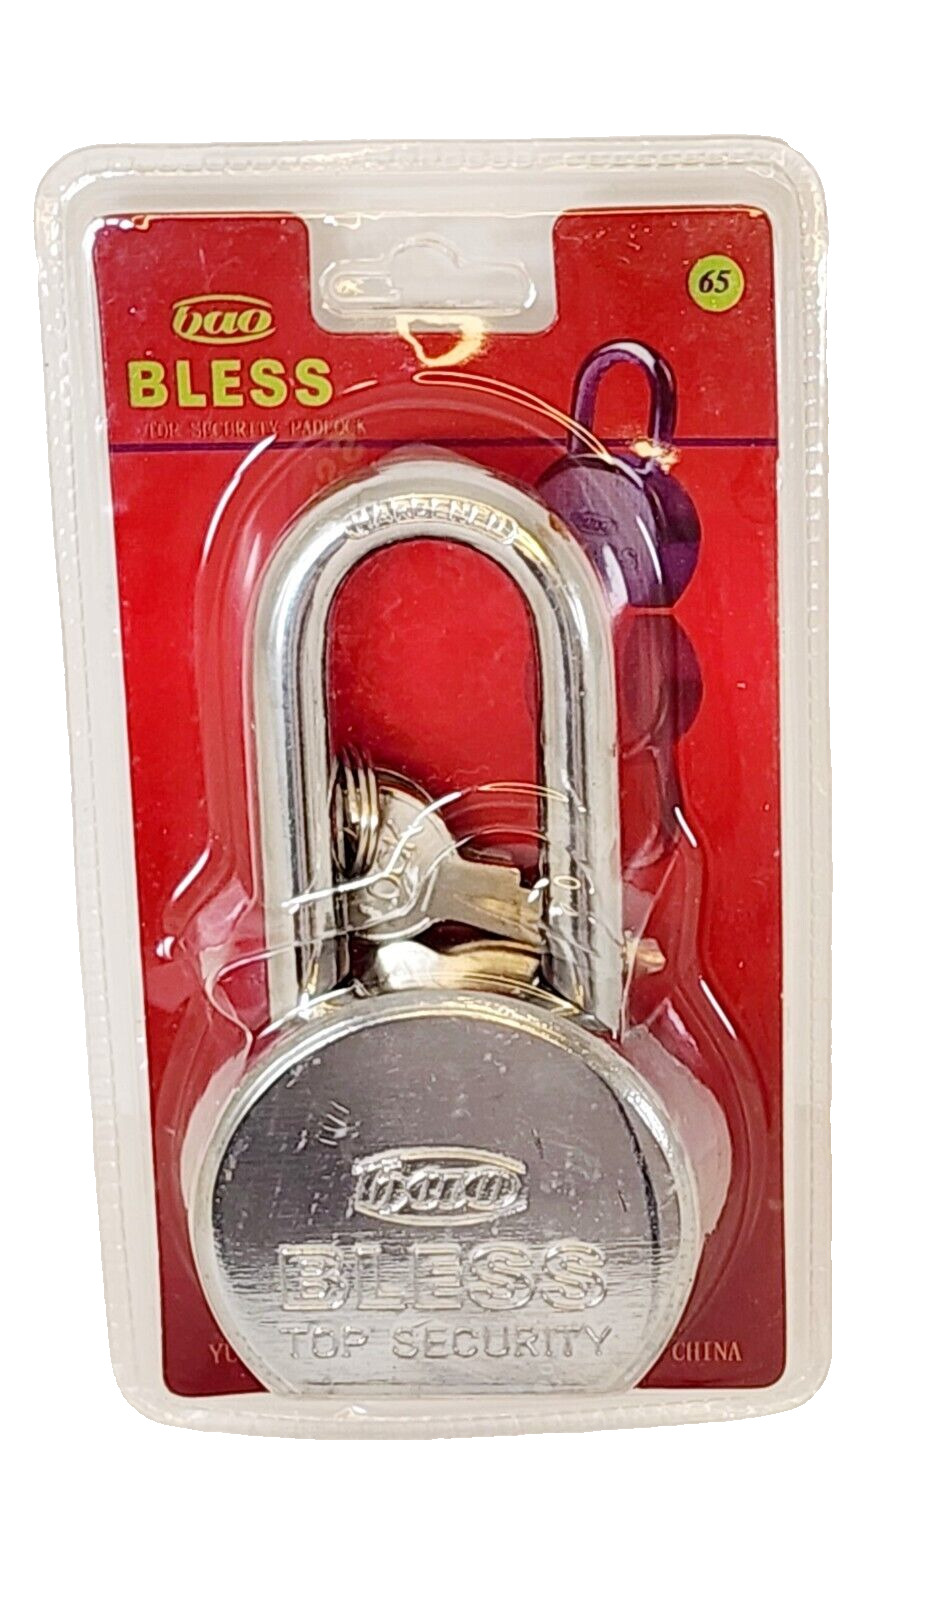 HEAVY DUTY/3 KEYS/NEW, PADLOCK BAO BLESS TOP SECURITY  FOR COMMERCIAL/INDUSTRIAL